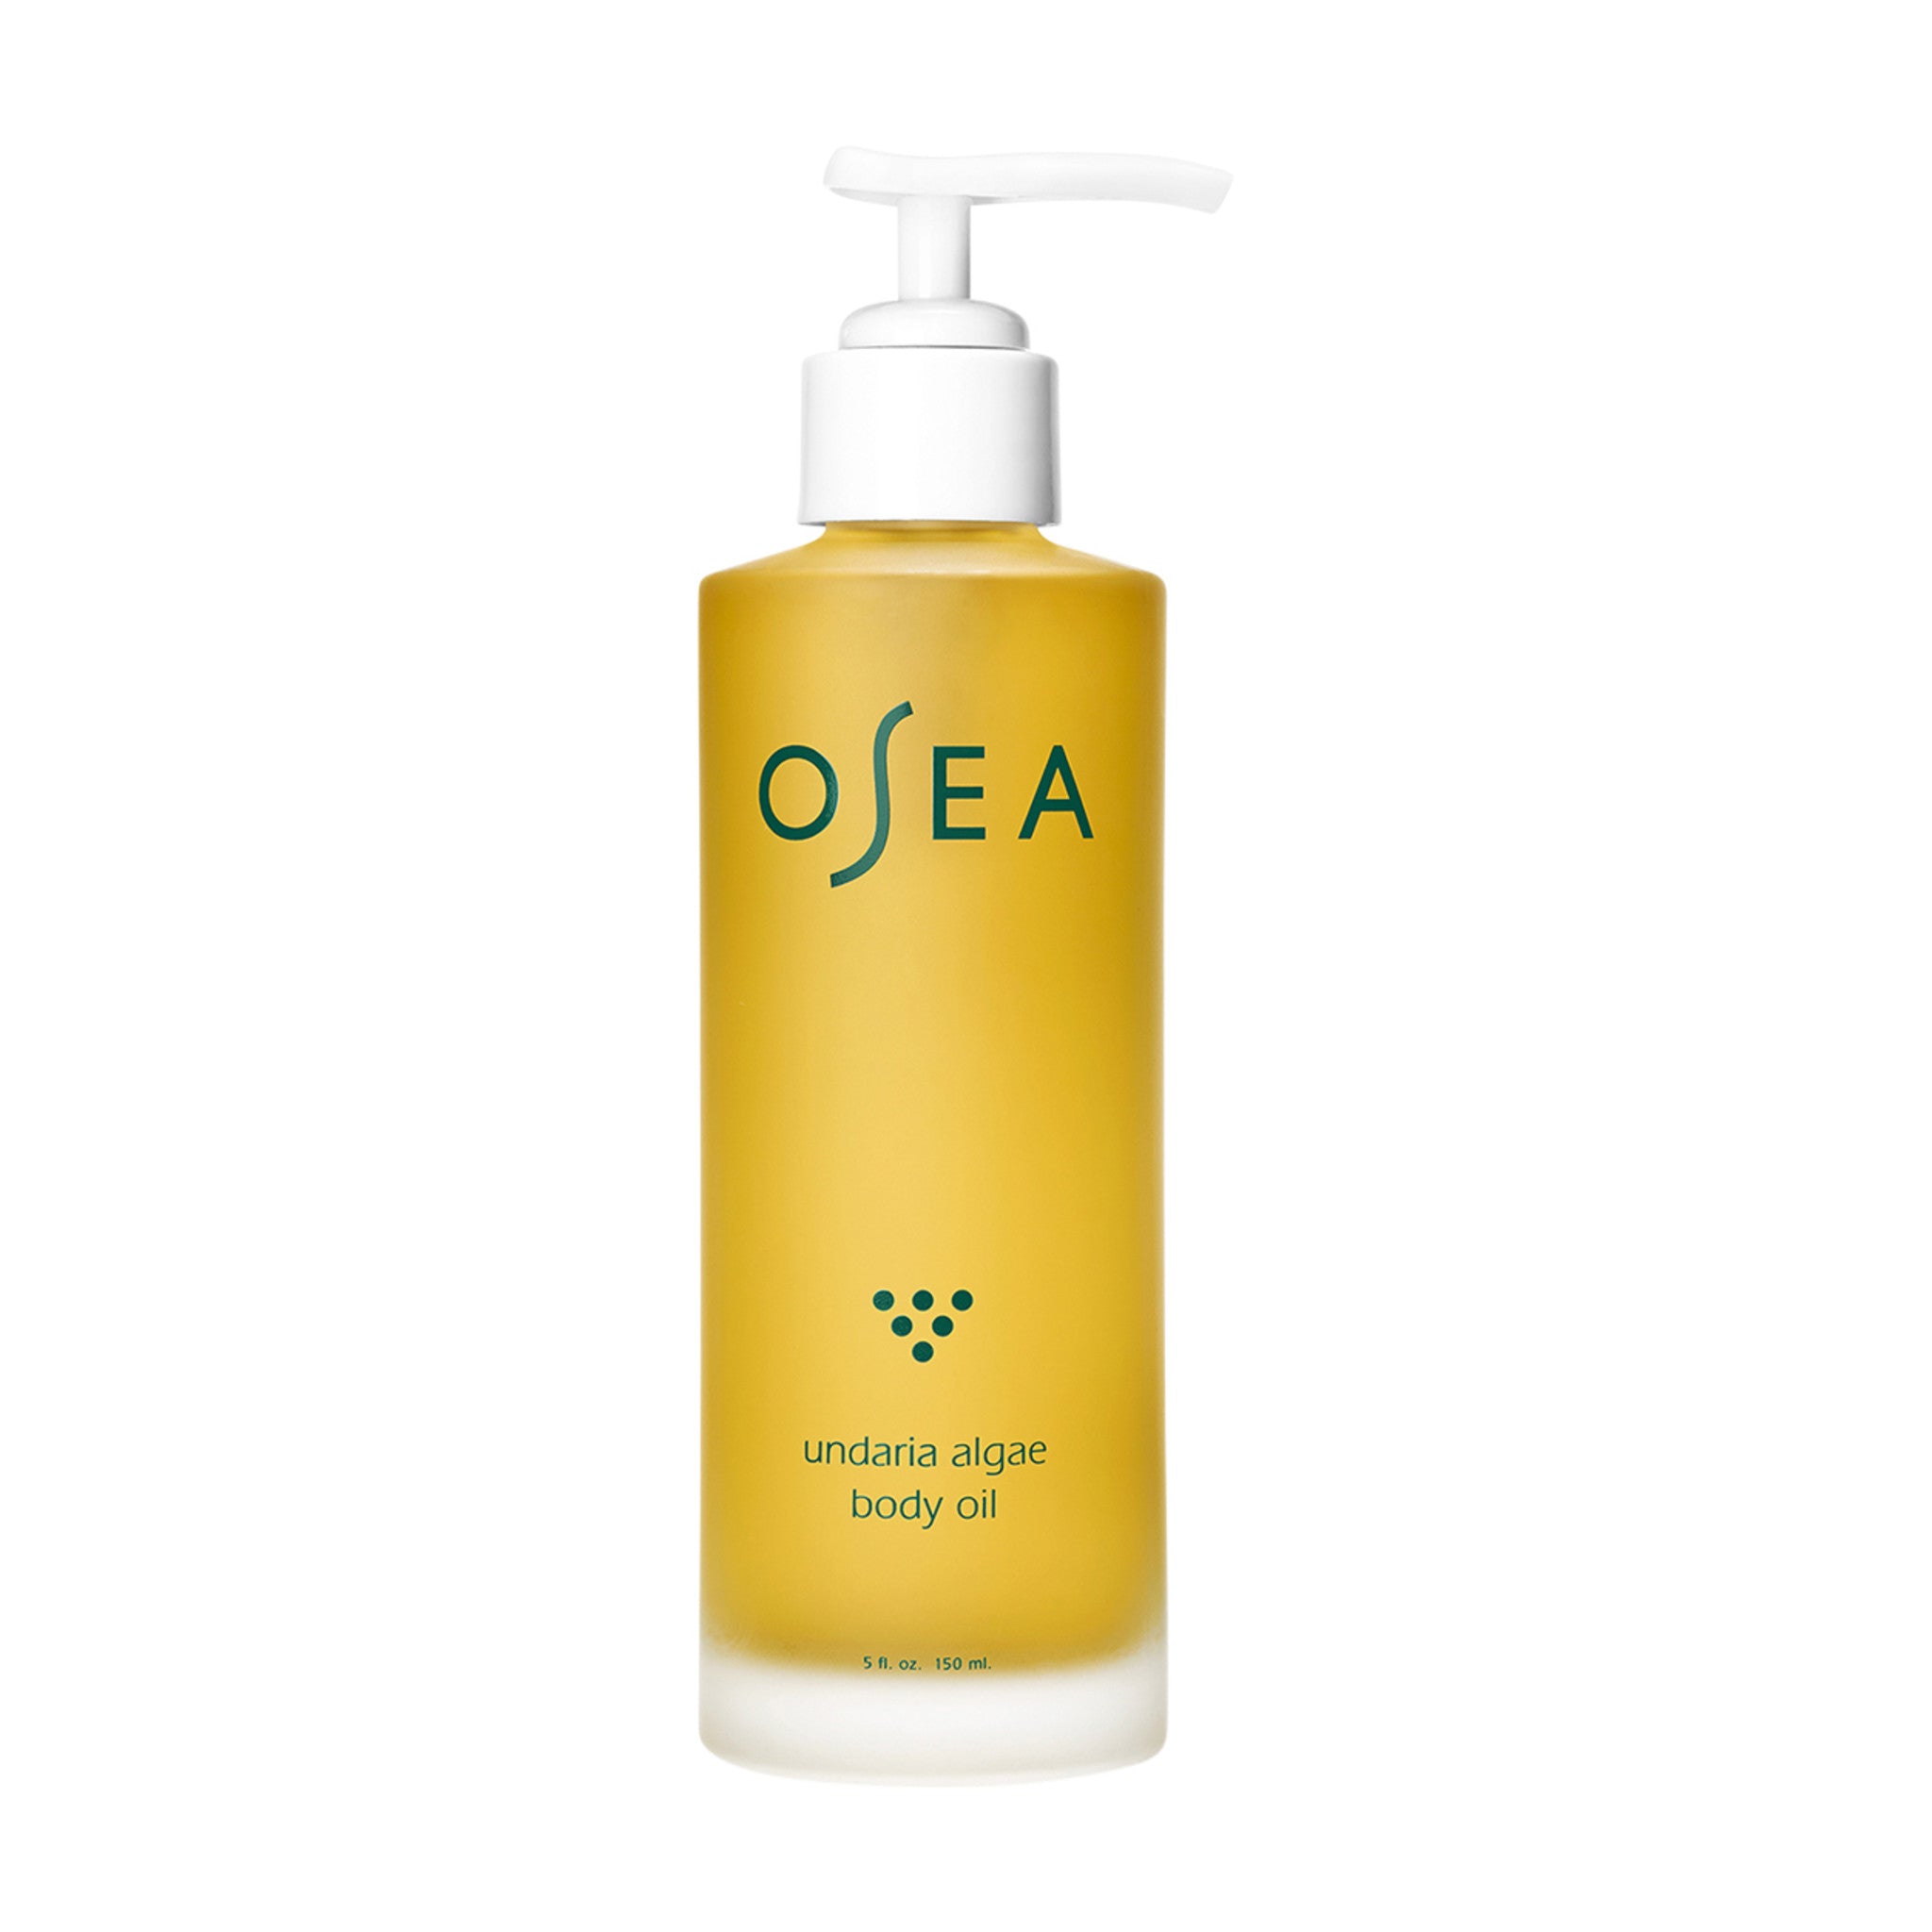 Nourishing Body Oil: Natural oil to soothe skin and help bring back el